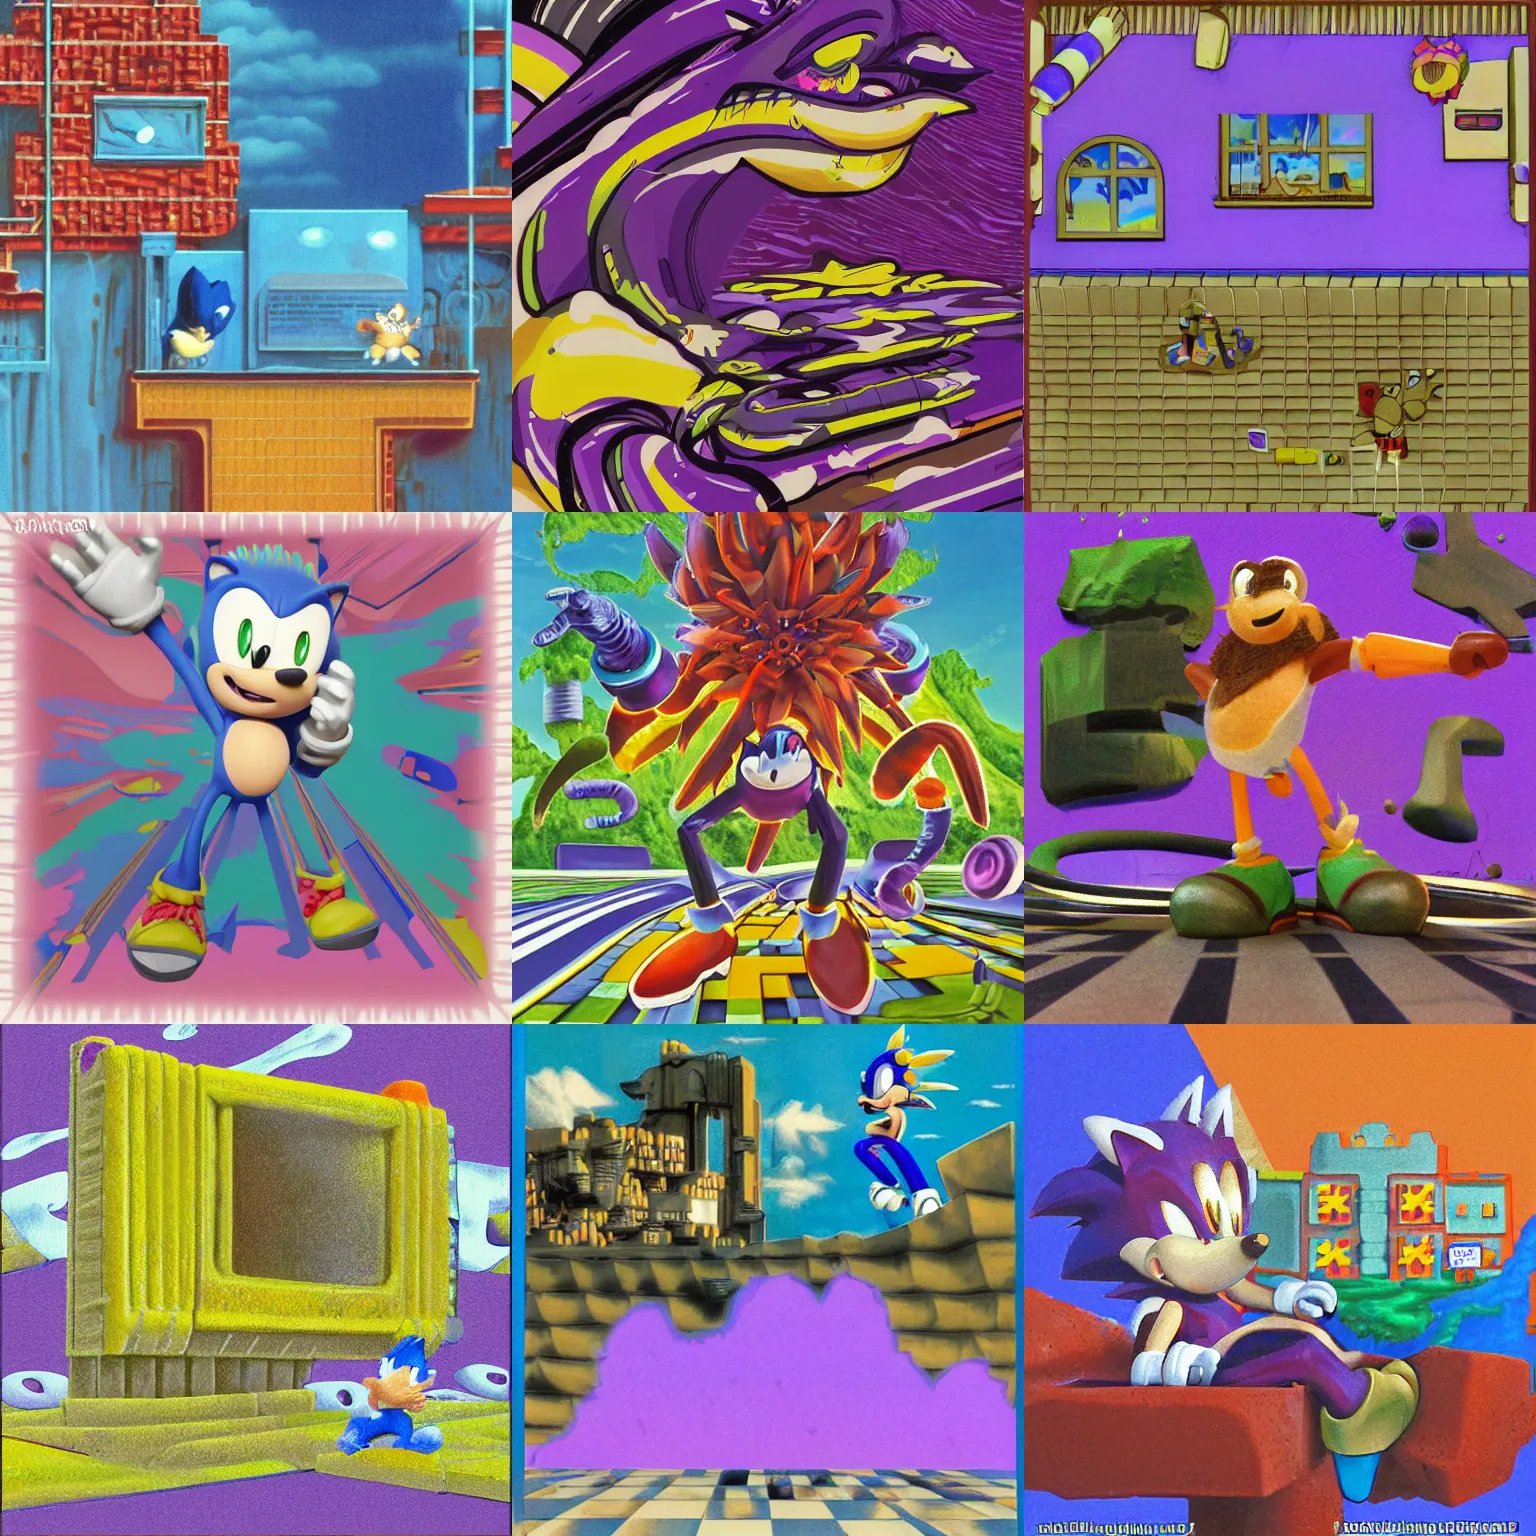 Prompt: dreaming of deconstructivist claymation portrait of sonic hedgehog and a matte painting landscape of a surreal sharp, foggy detailed professional soft pastels high quality airbrush art album cover of a liquid dissolving airbrush art lsd sonic the hedgehog swimming through cyberspace purple checkerboard background 1 9 9 0 s 1 9 9 2 sega genesis rareware video game album cover